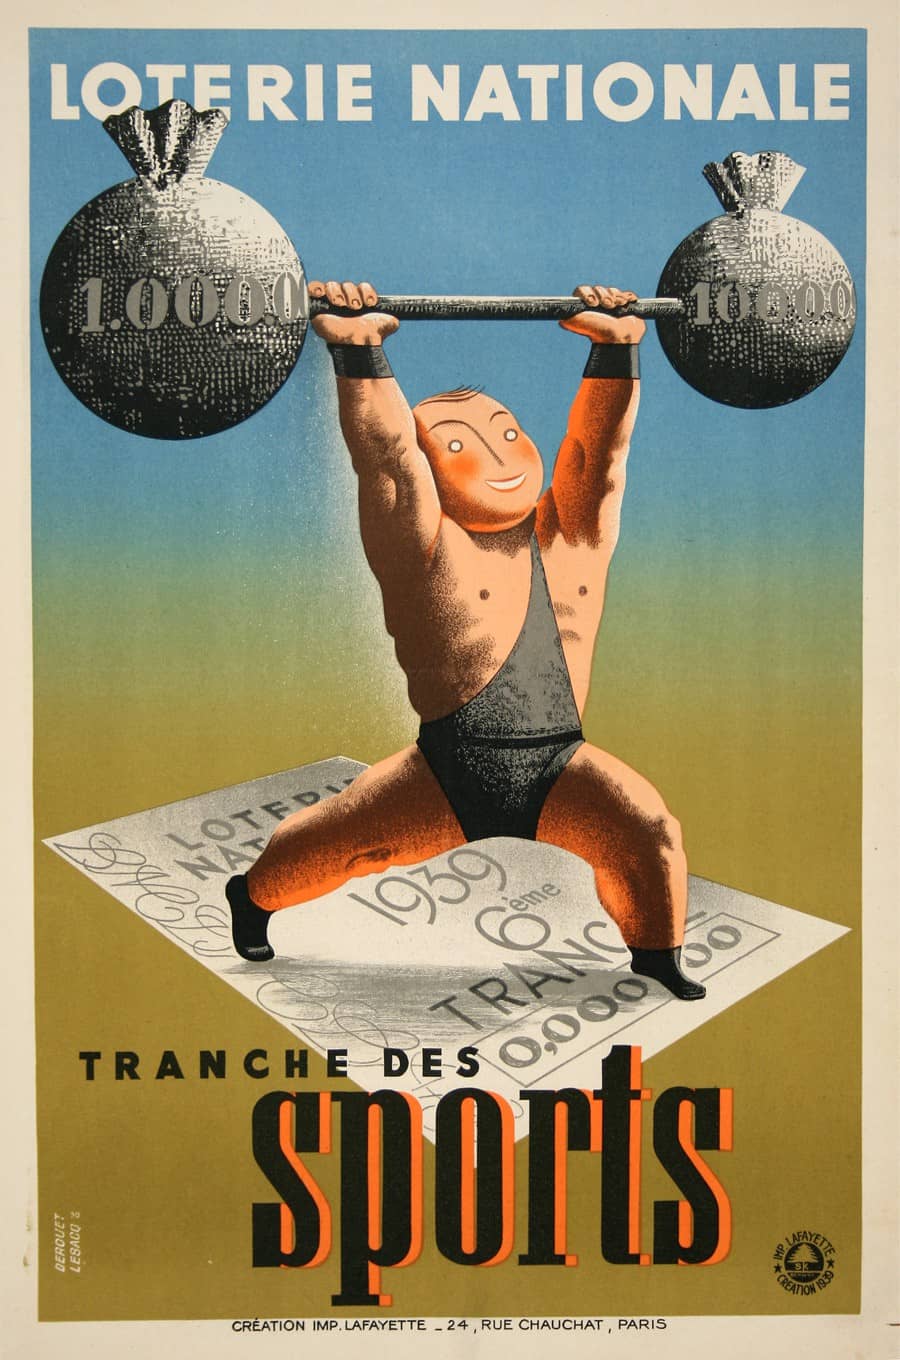 Original Vintage Loterie Nationale Tranche des Sports Poster by Derouet Lesacq 1939 French Lottery Weightlifter